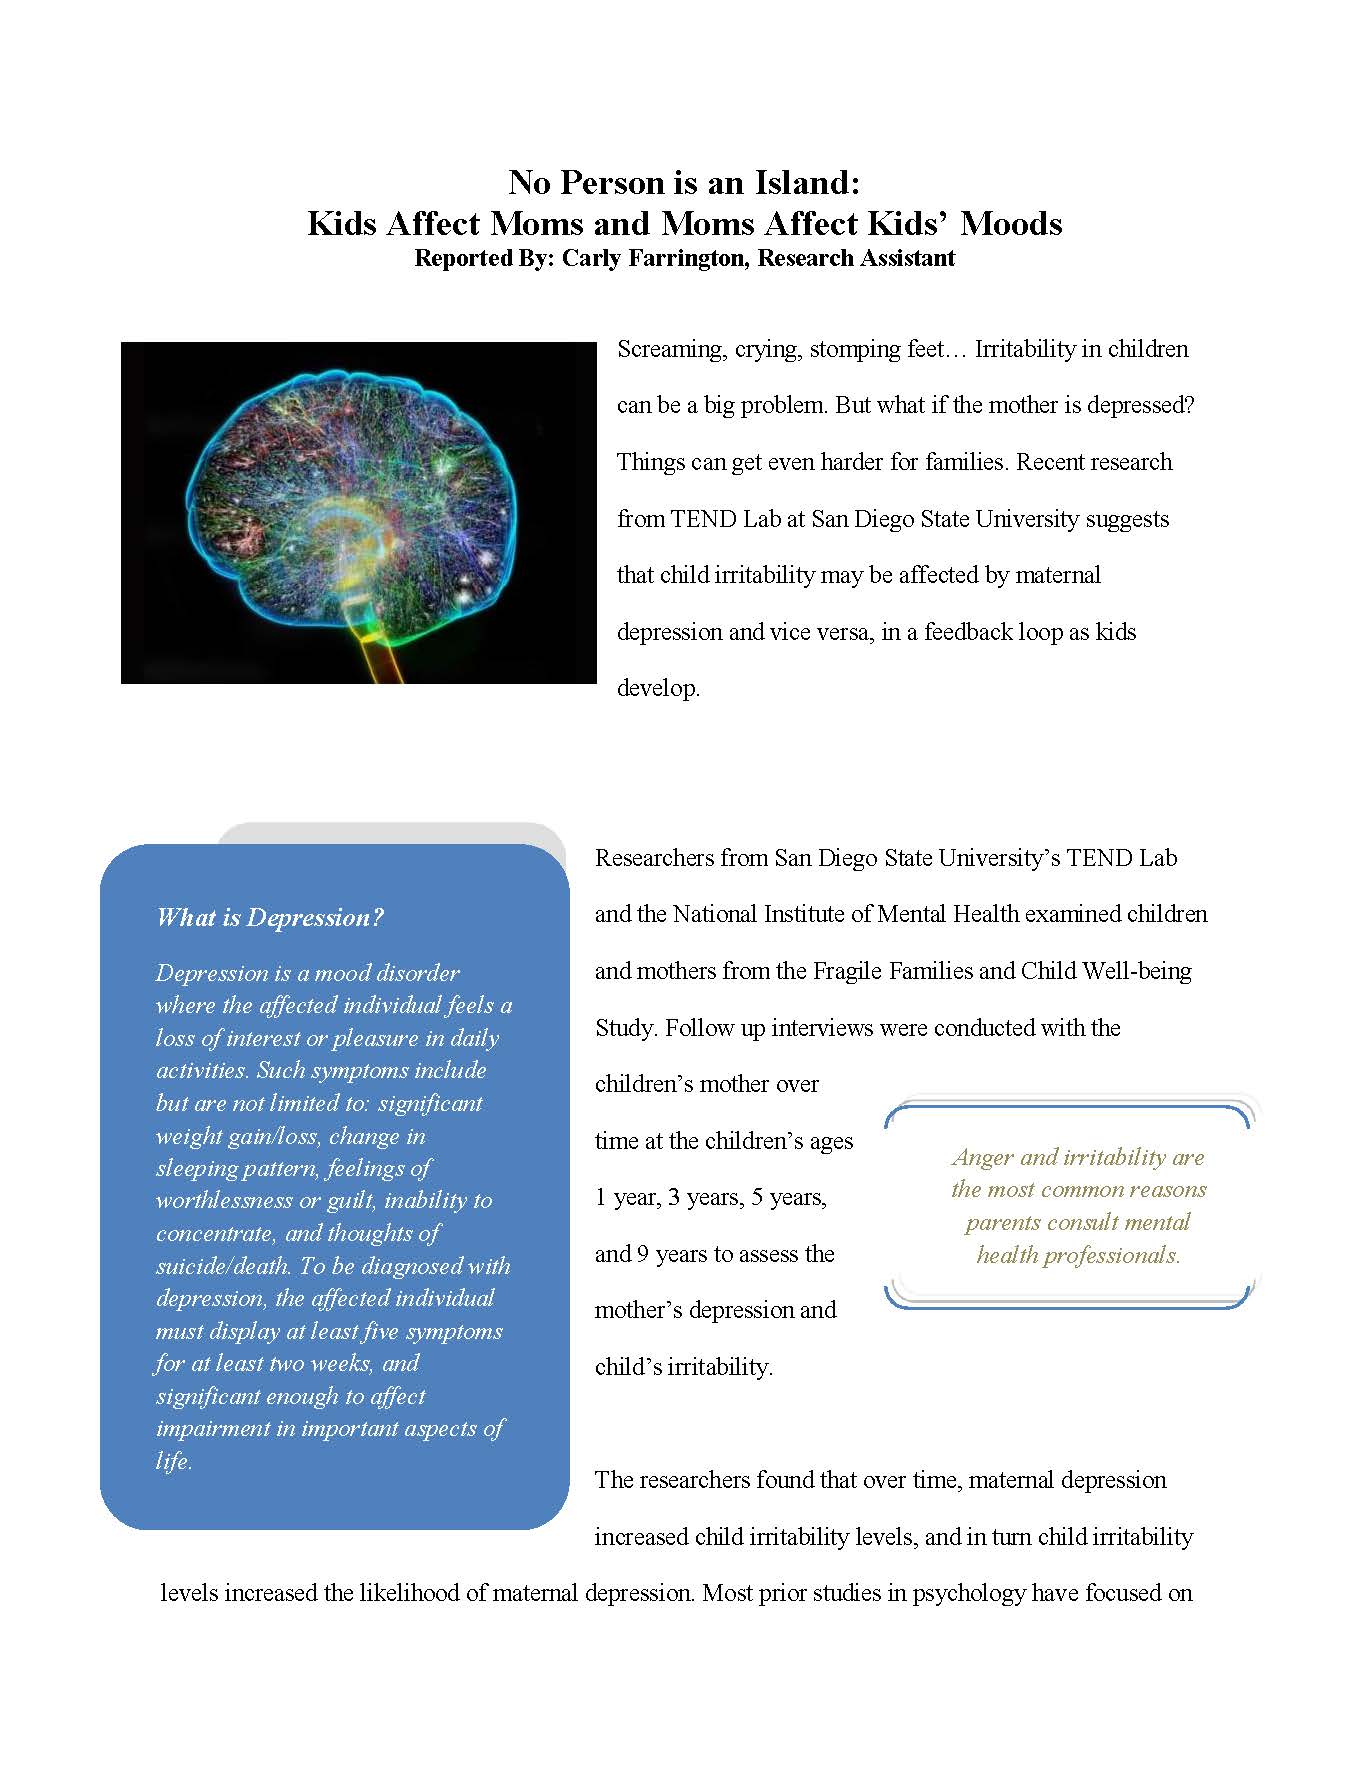 Depression news article page 1 titled "No Person is an Island: Kids Affect Moms and Moms Affect Kids’ Moods"